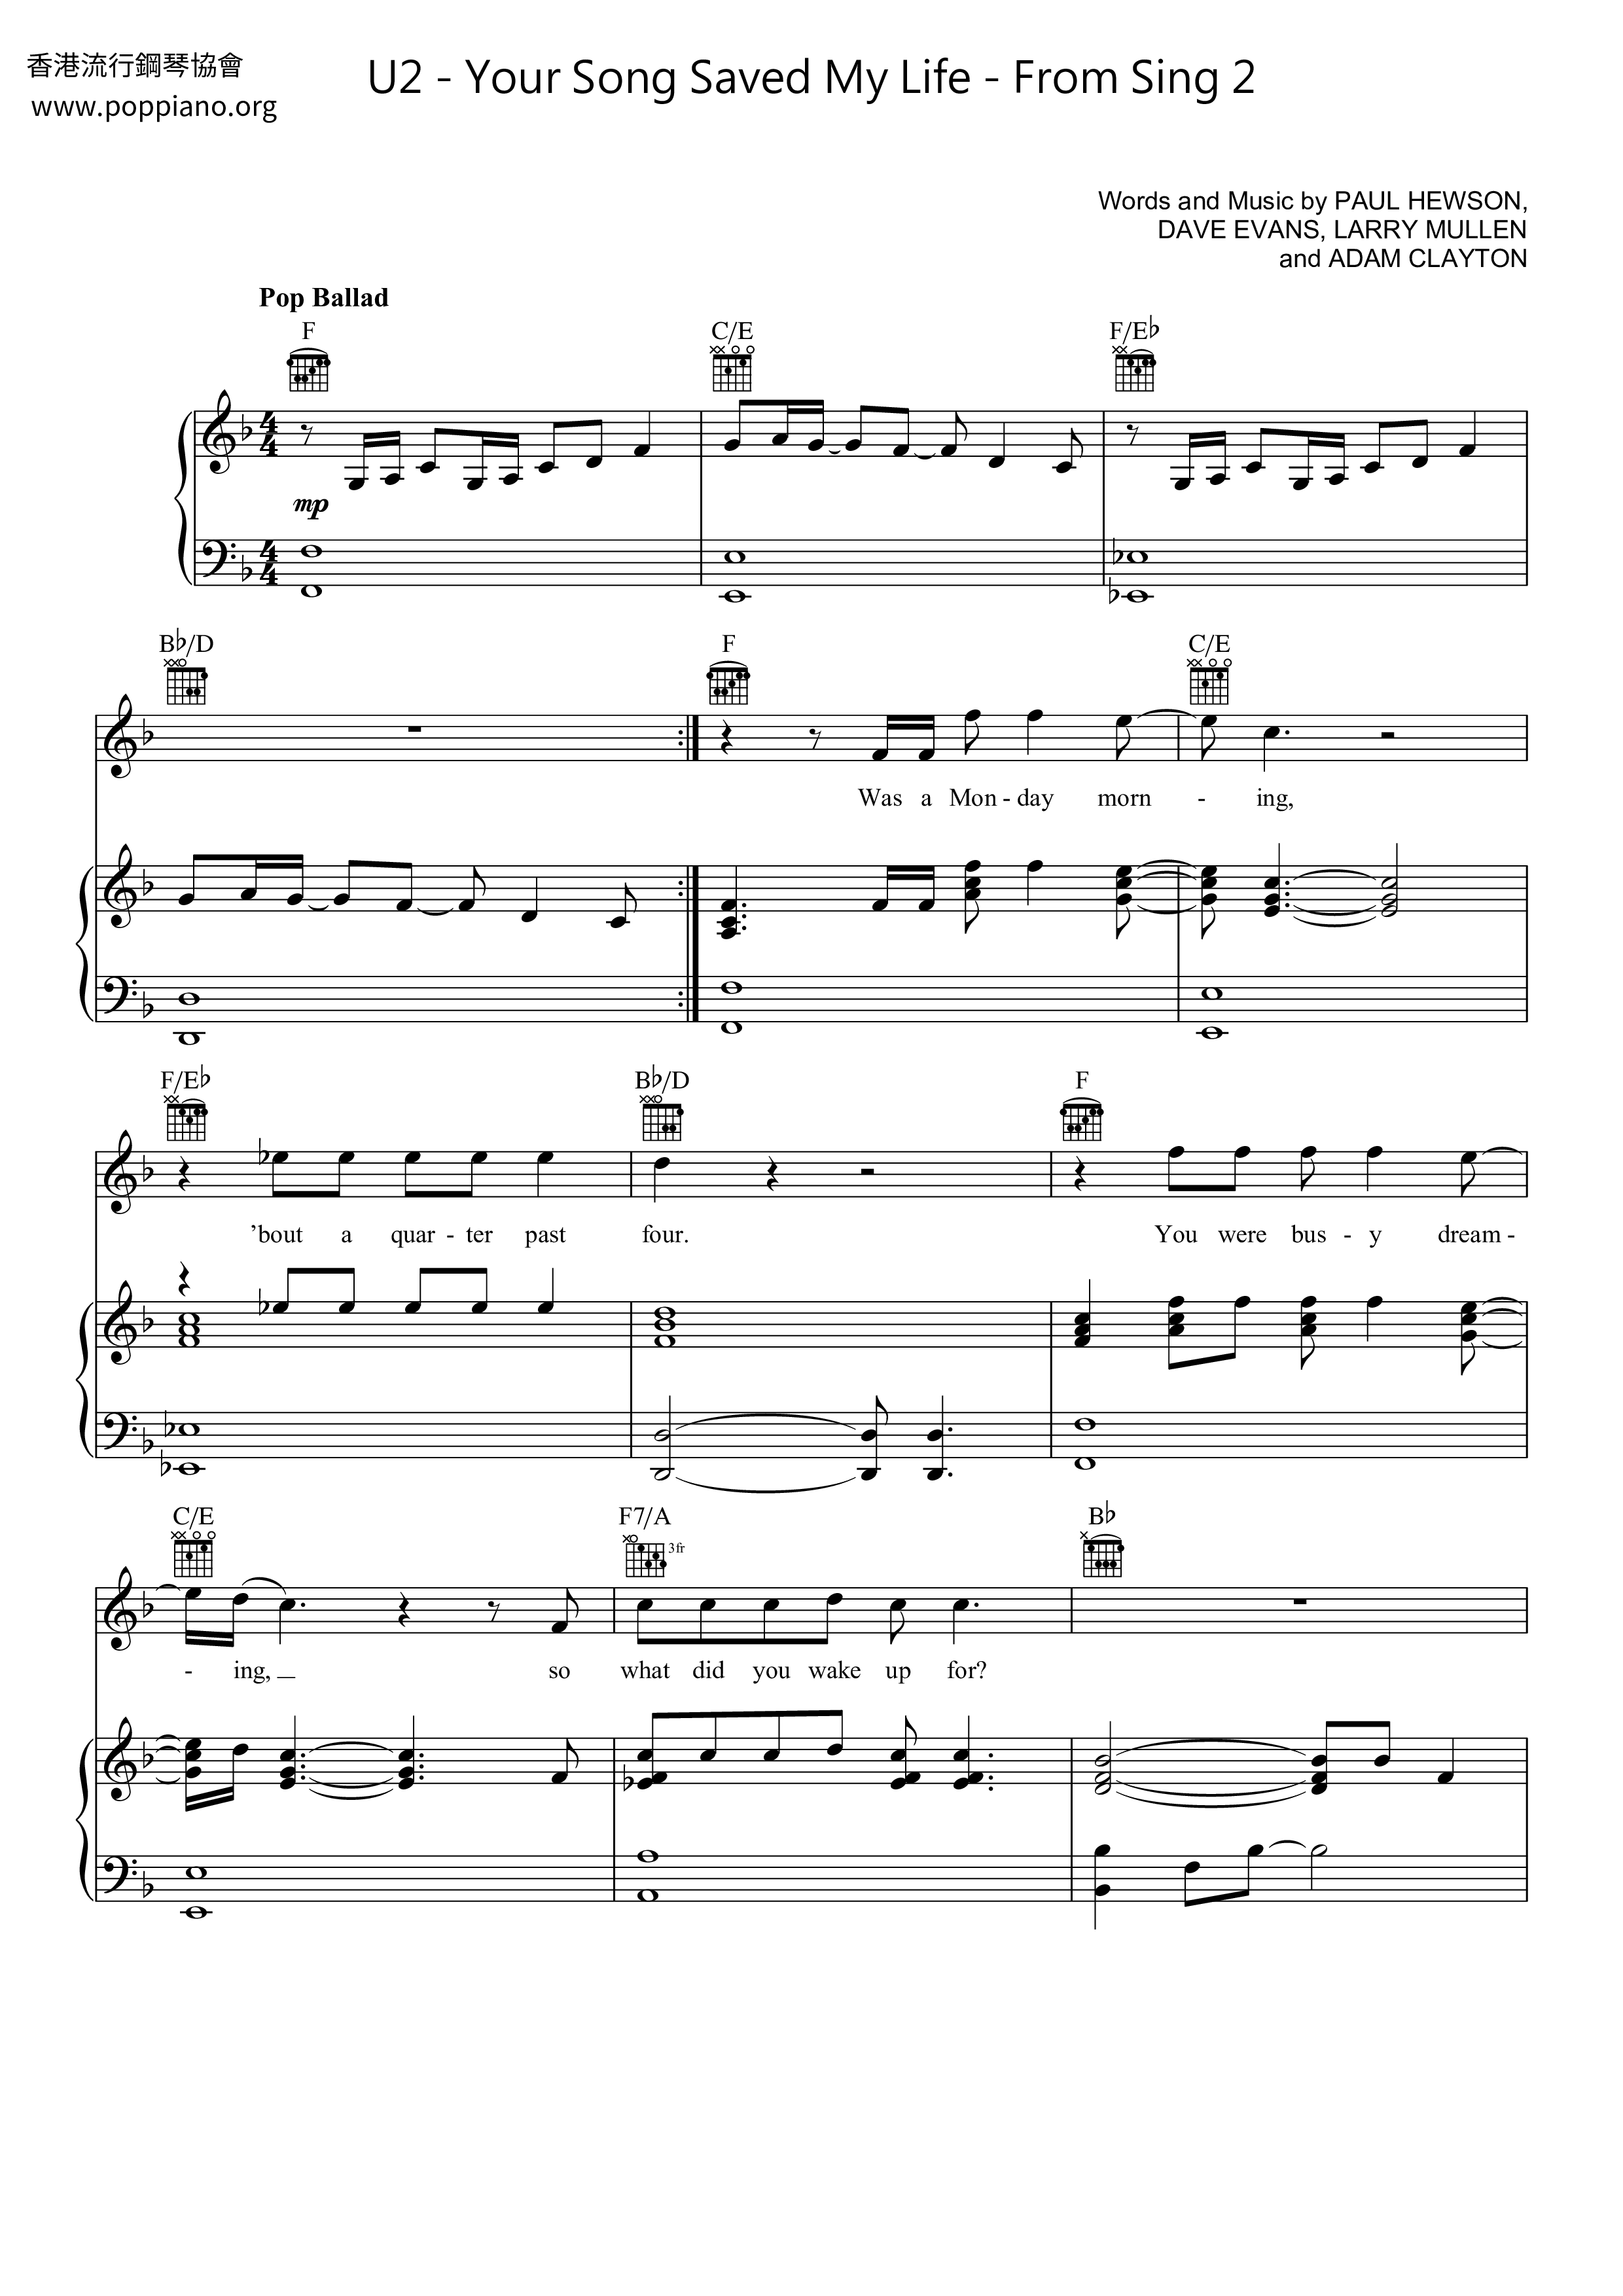 Your Song Saved My Life - From Sing 2 Score